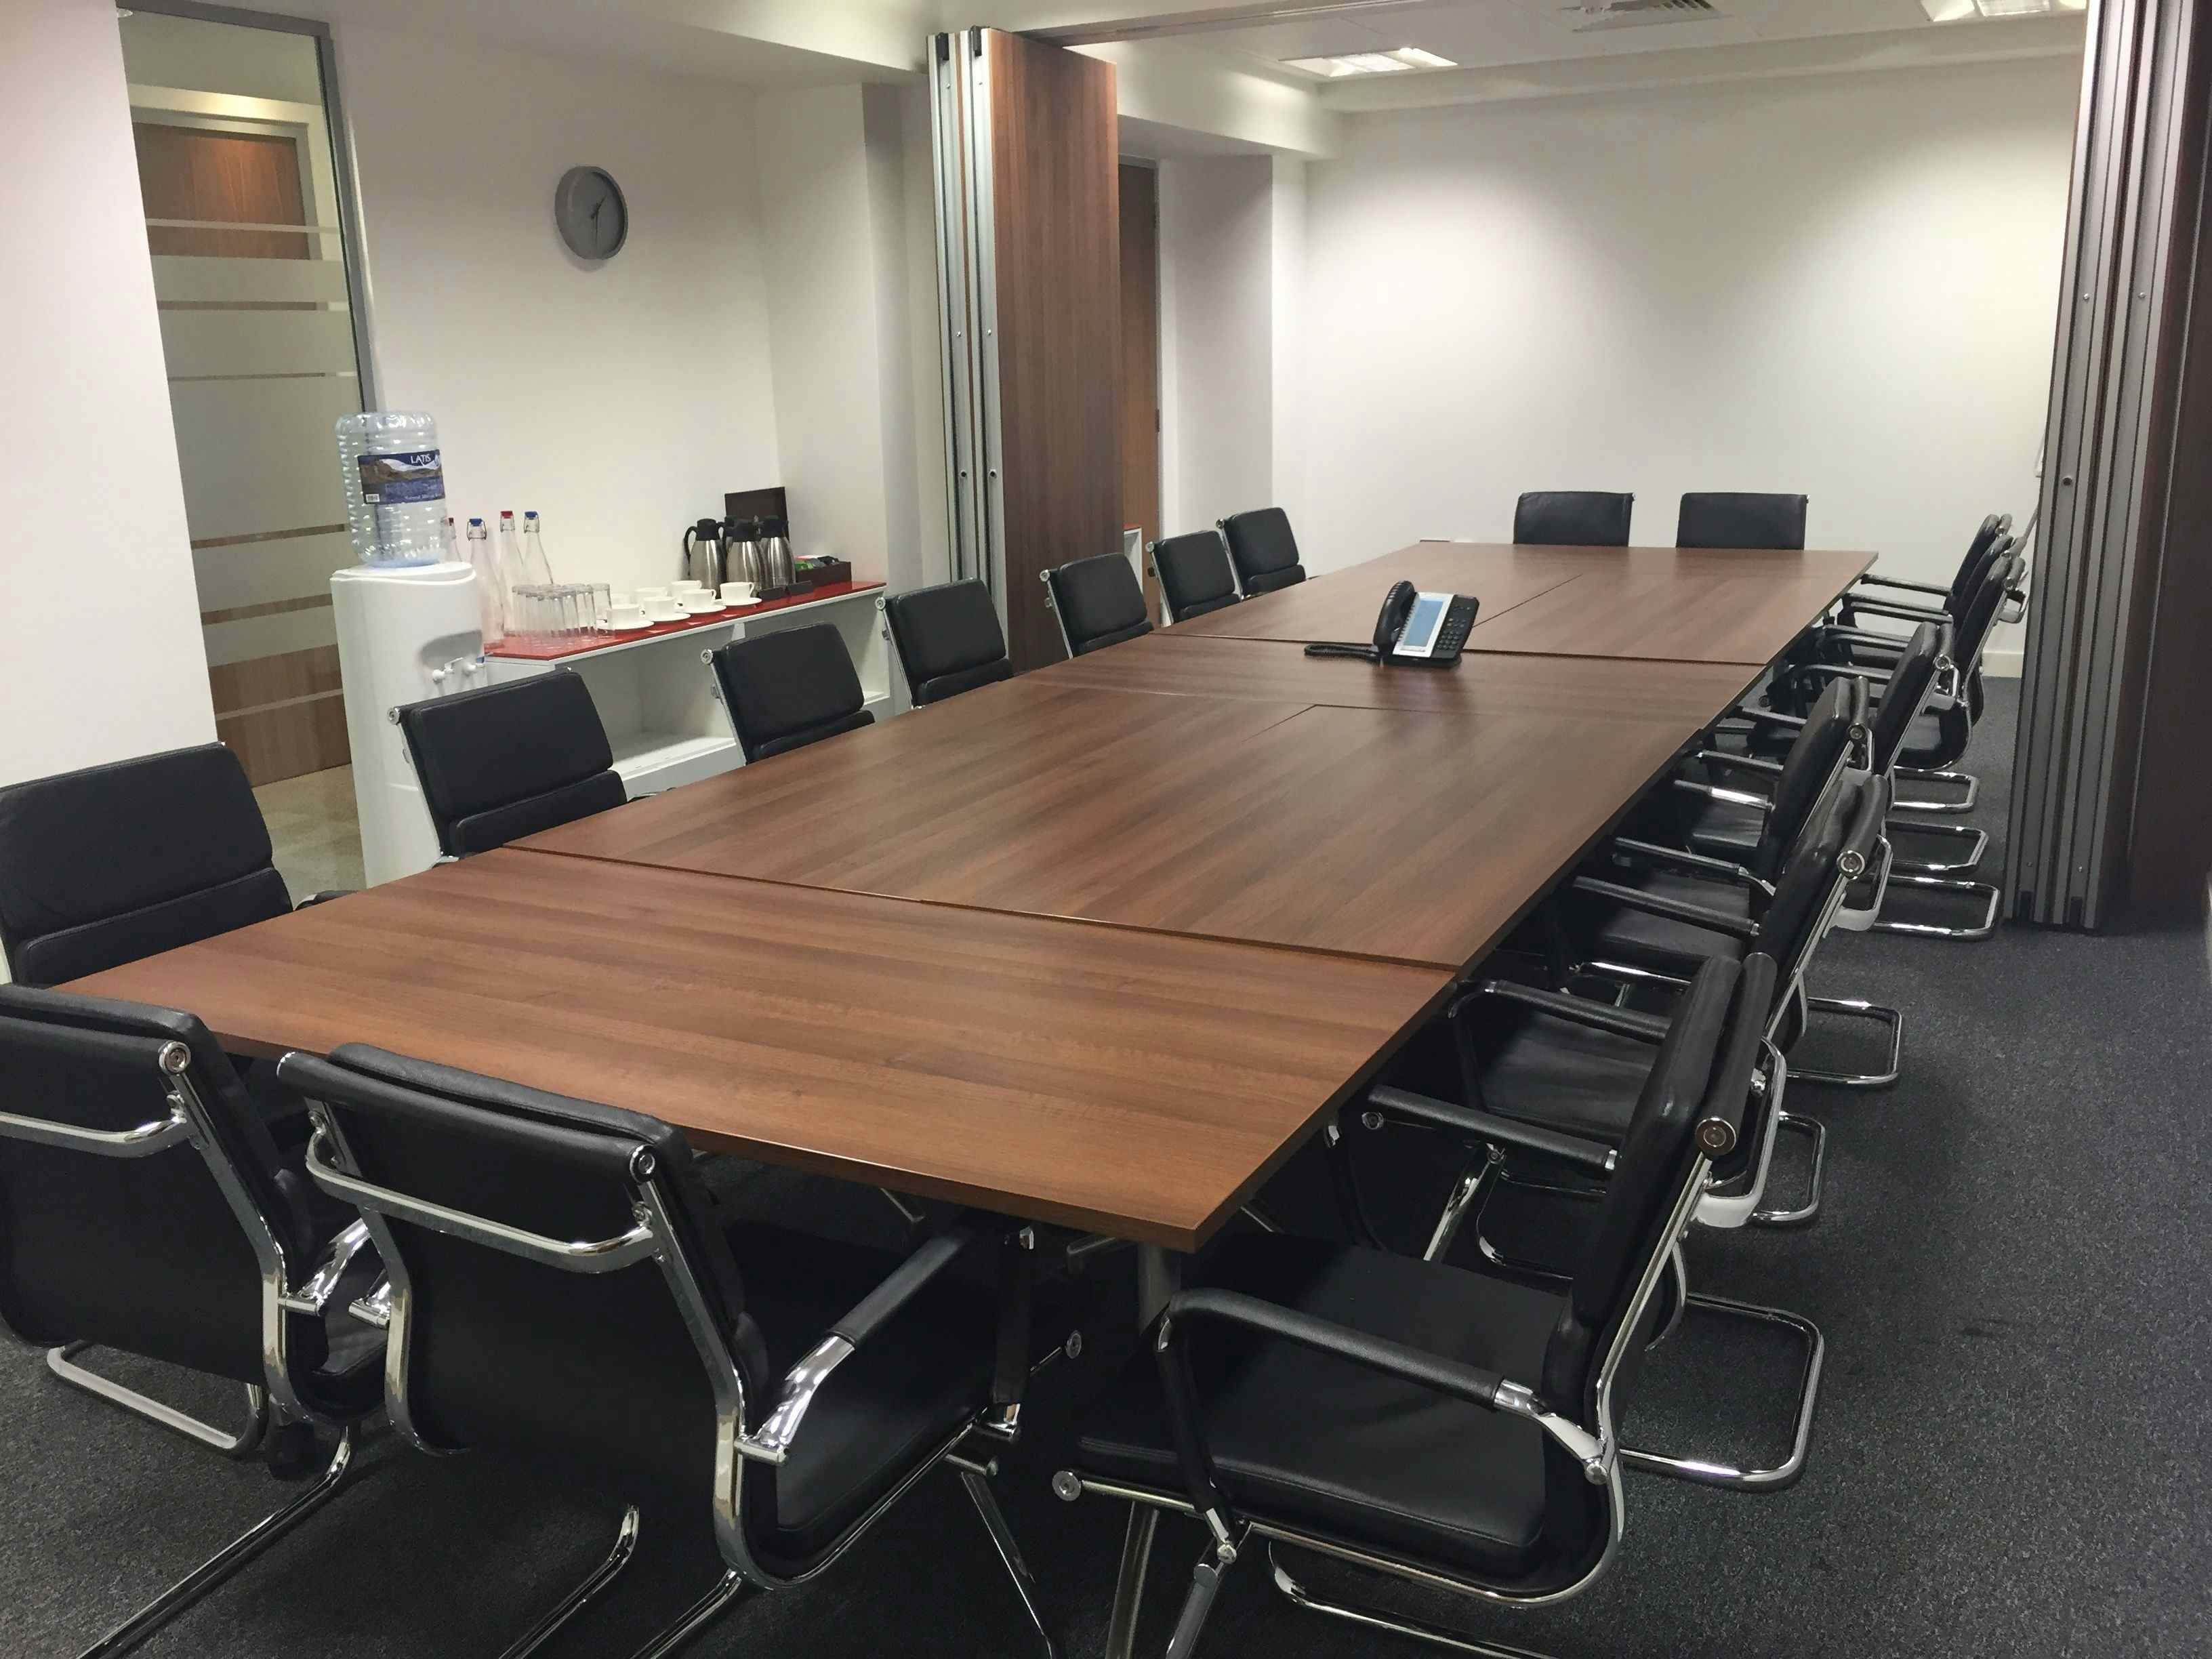 Meeting Room - Lecture Style, Becket House